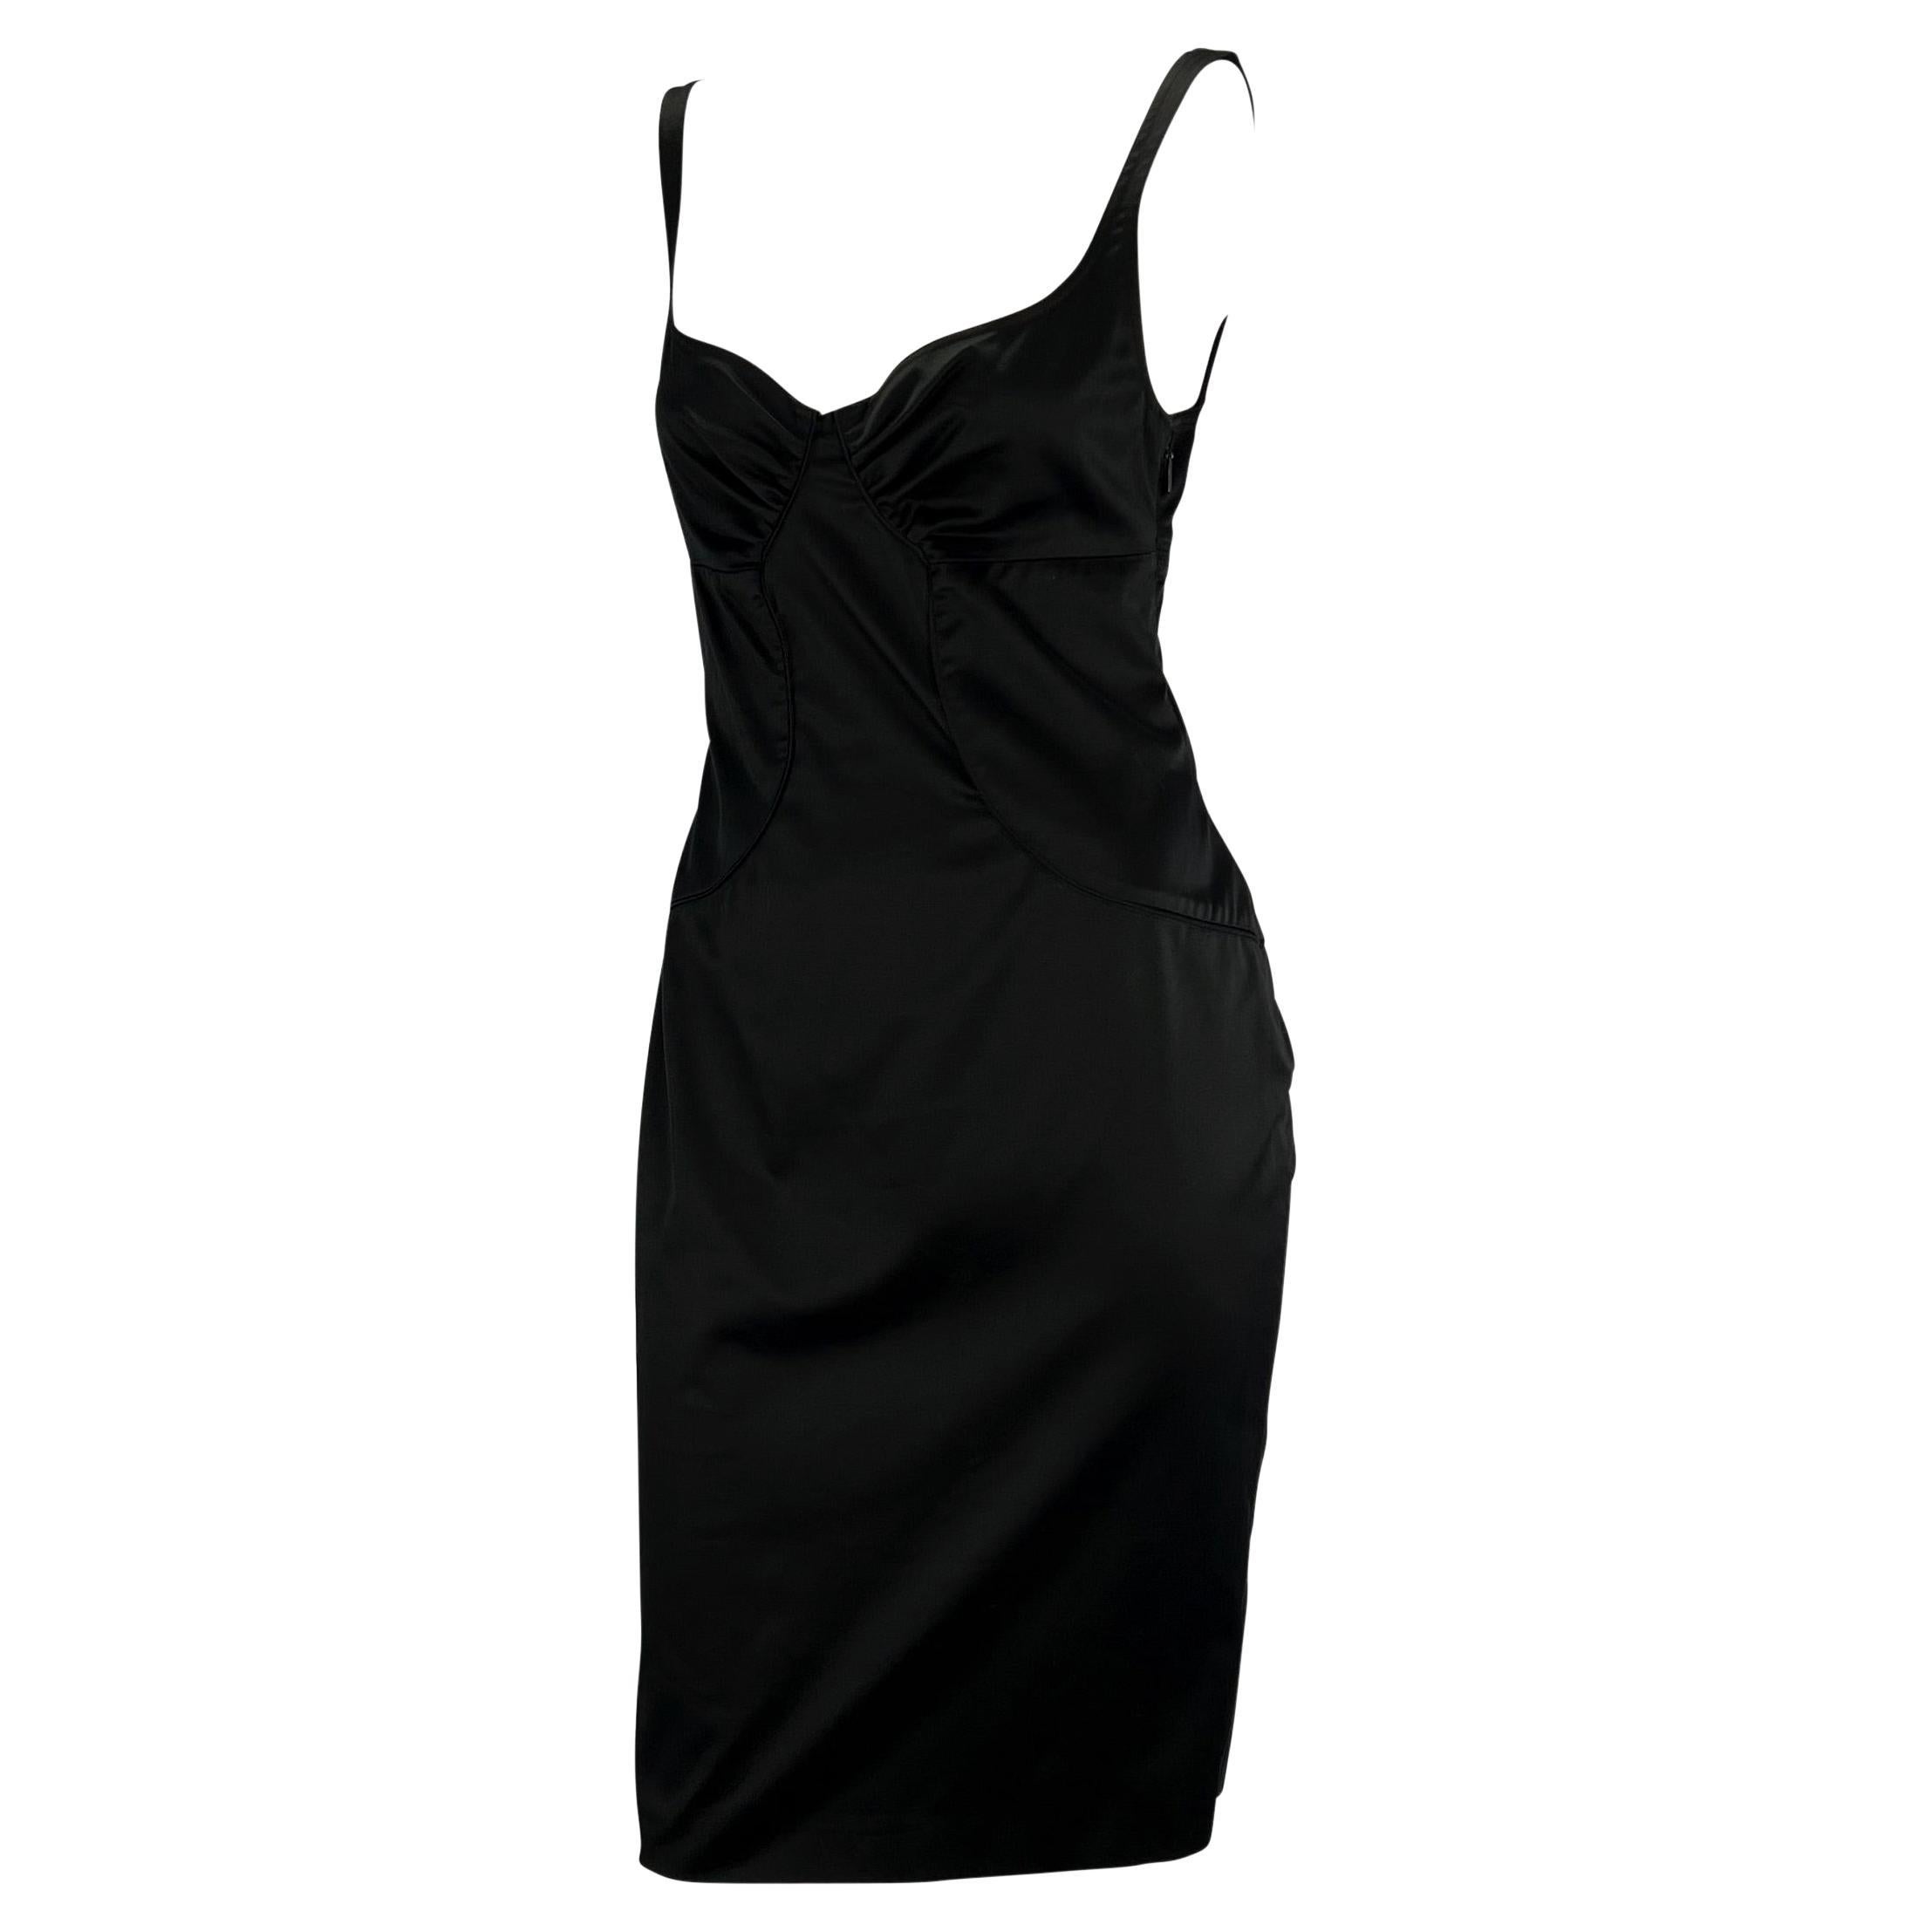 Women's 2003 Gucci by Tom Ford Back Tie Black Sleeveless Cutout Dress 